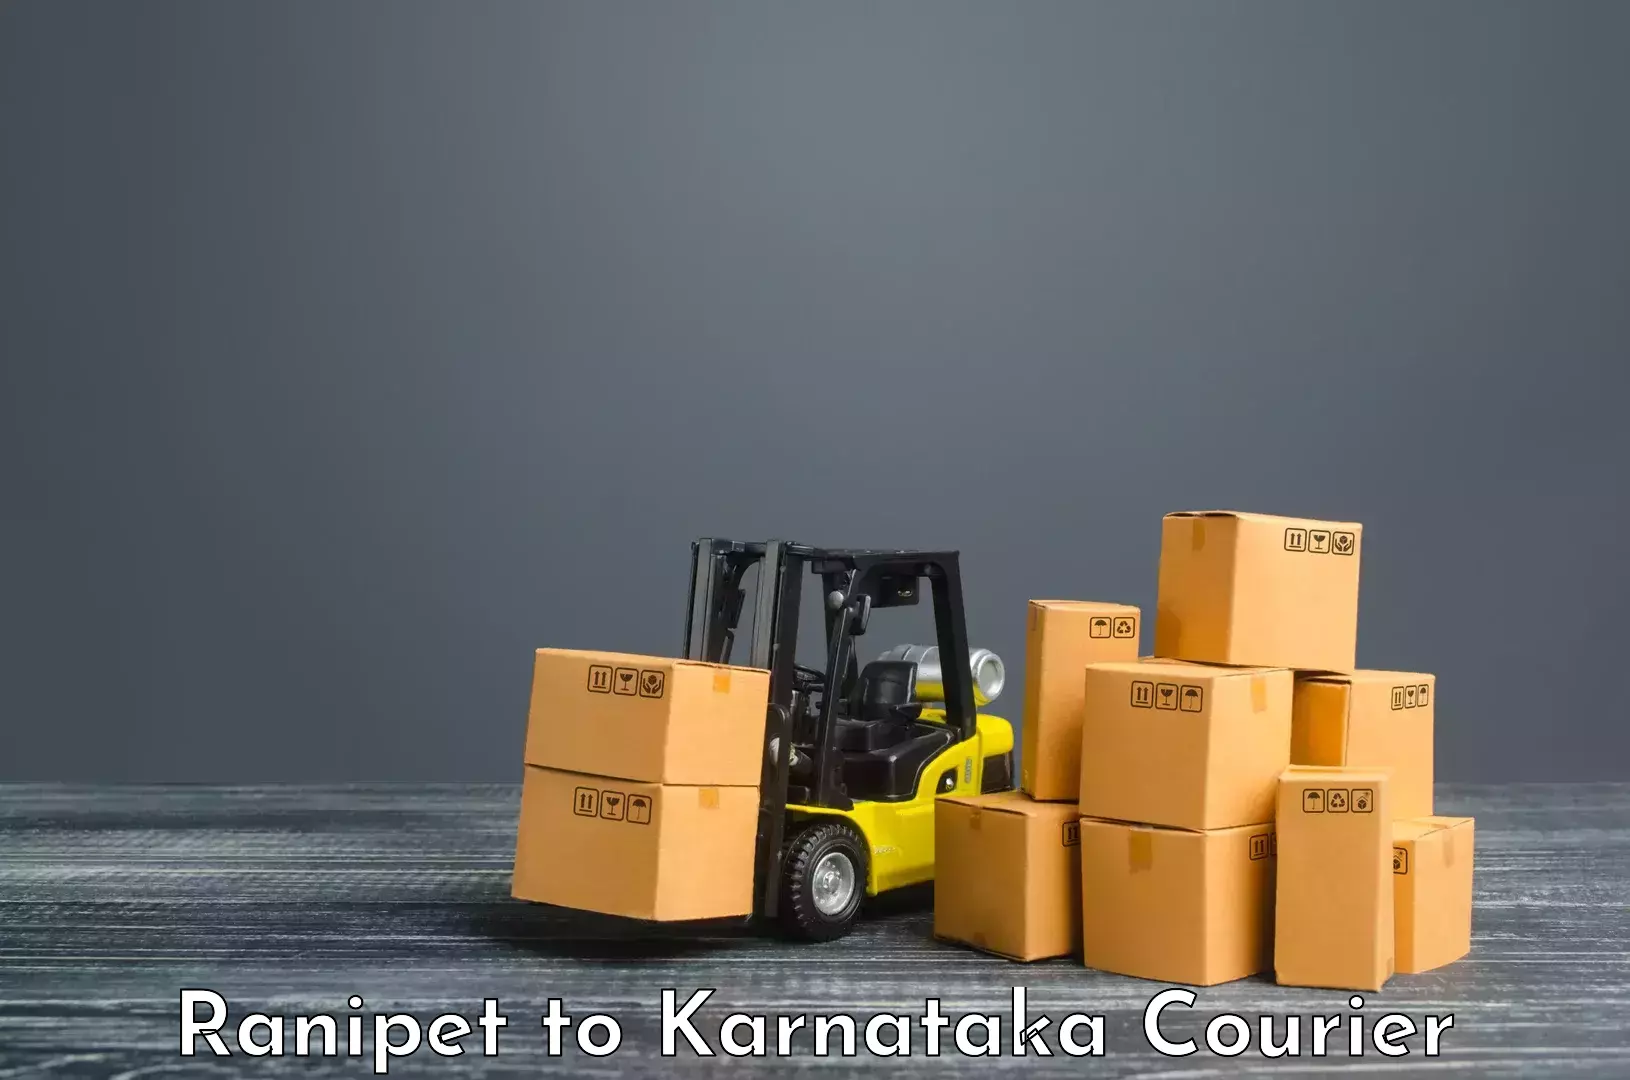 Express delivery network Ranipet to Kodagu